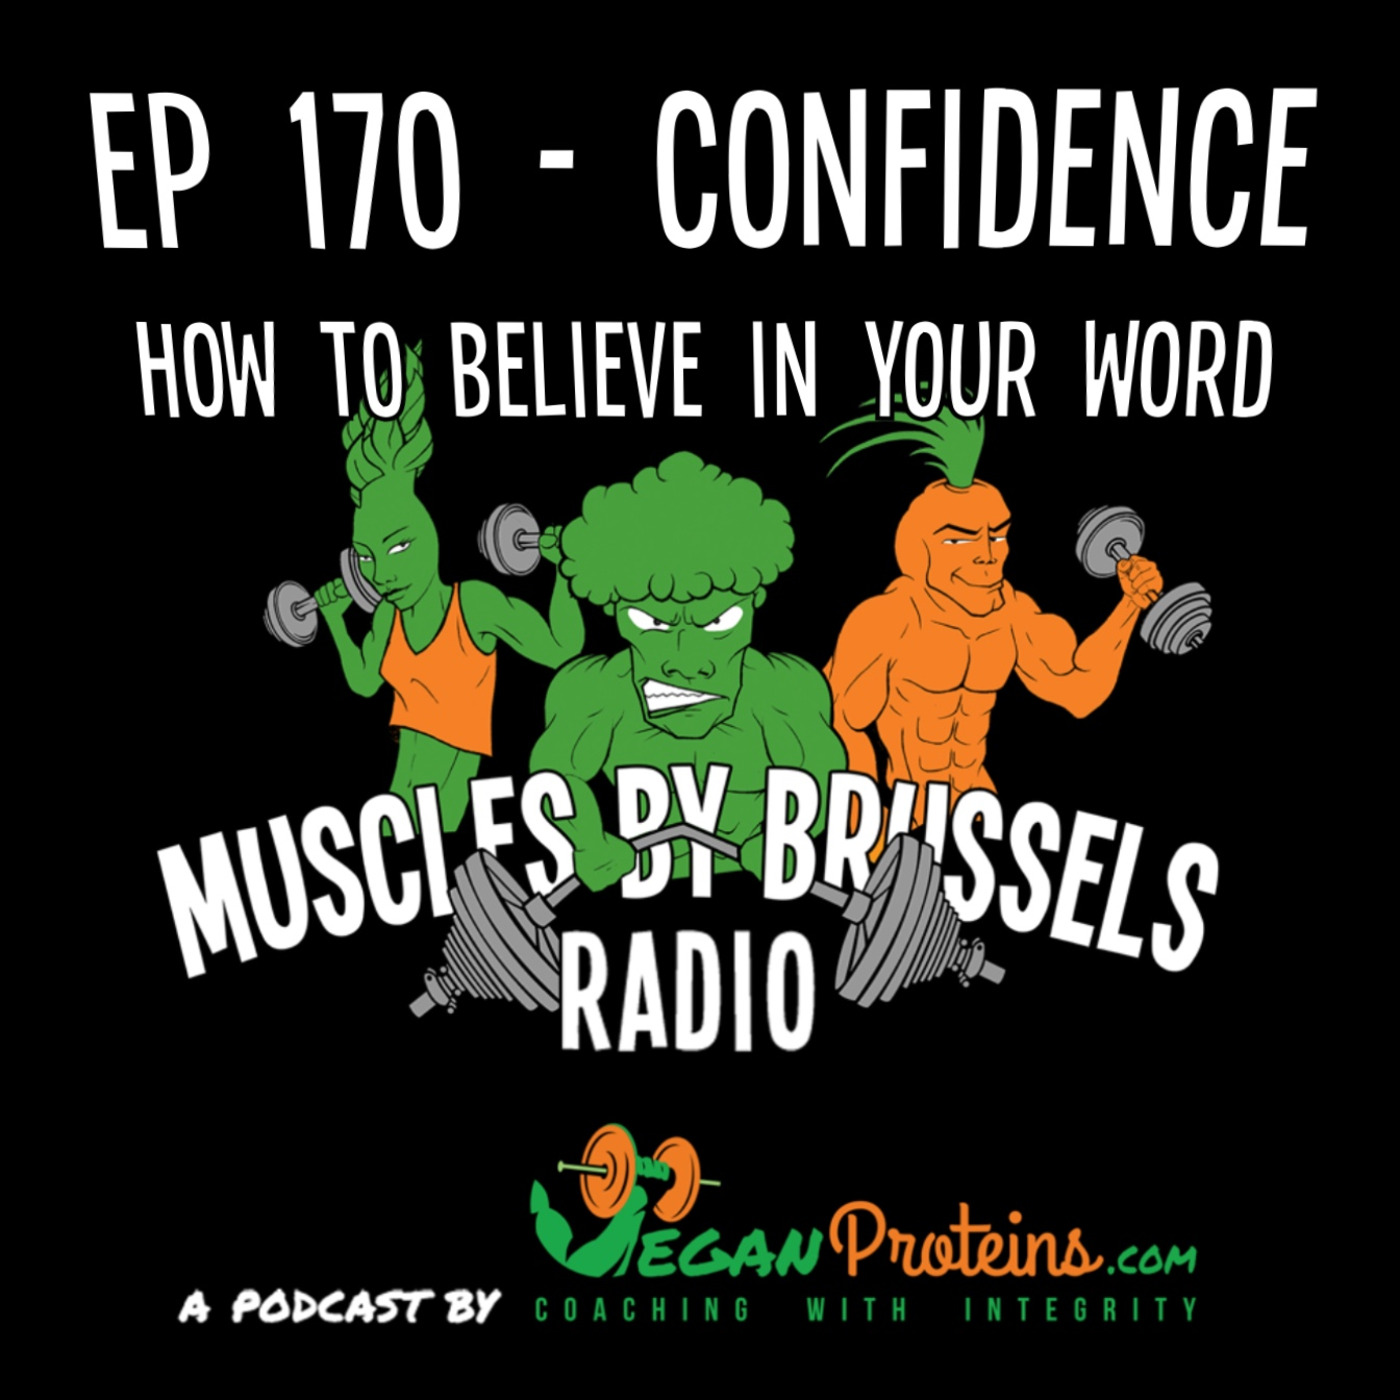 Ep 170 - Confidence - How To Believe In Your Word